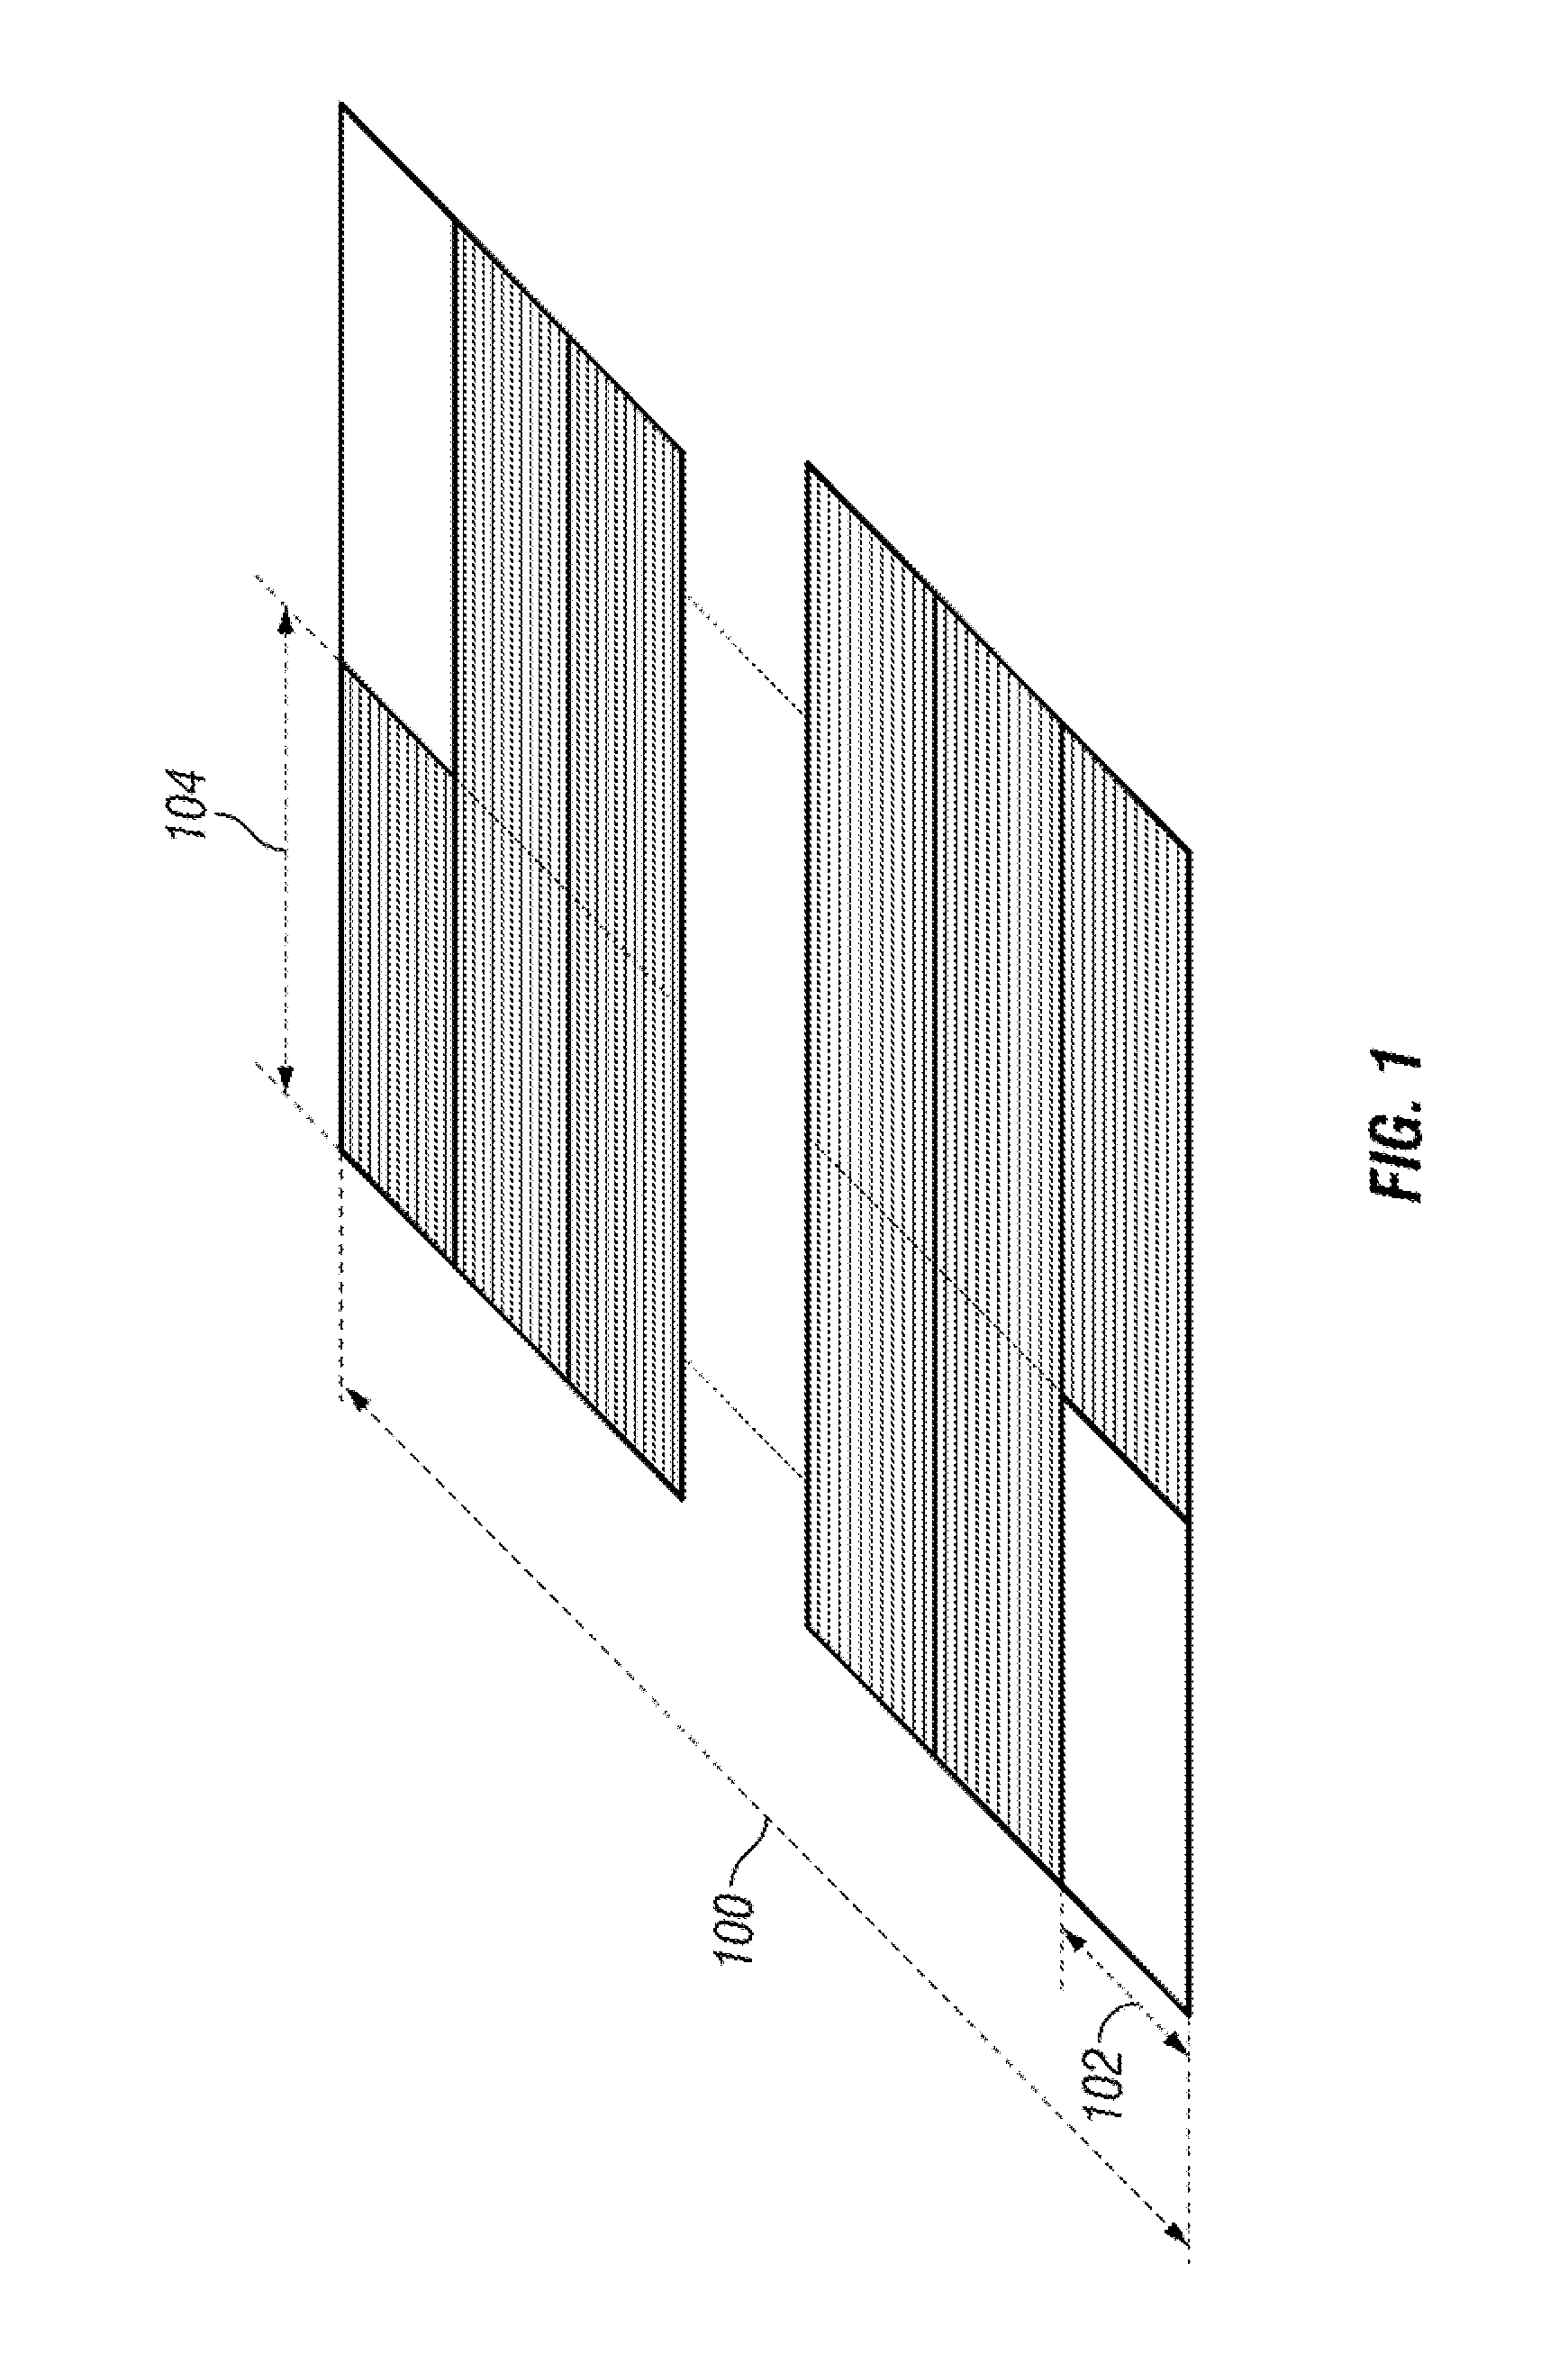 System and method for signaling control information in a mobile communication network